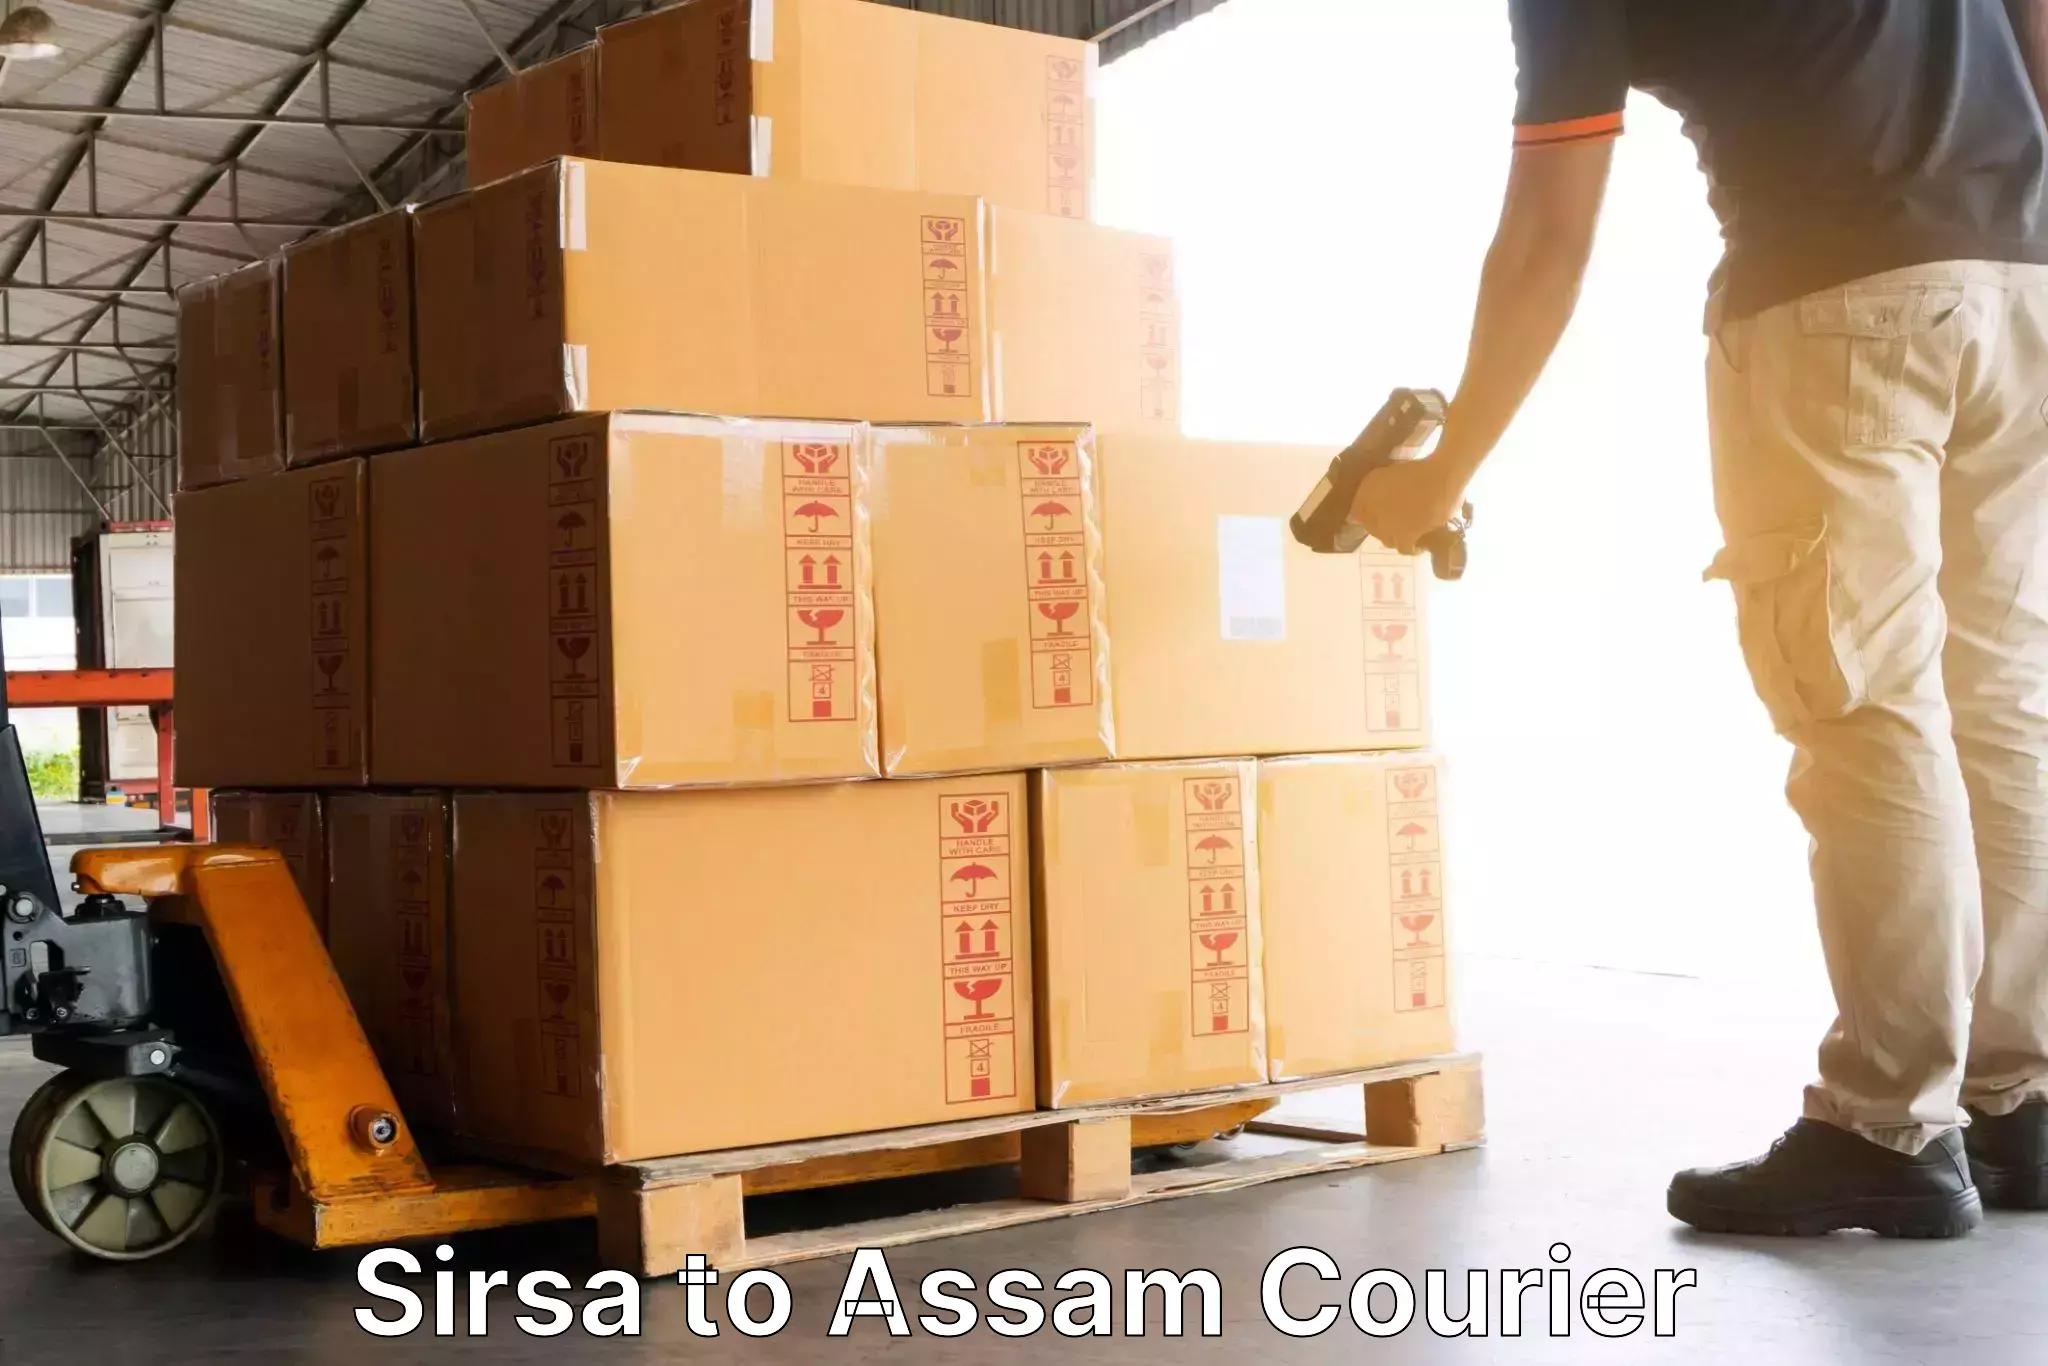 Global shipping solutions Sirsa to Dibrugarh